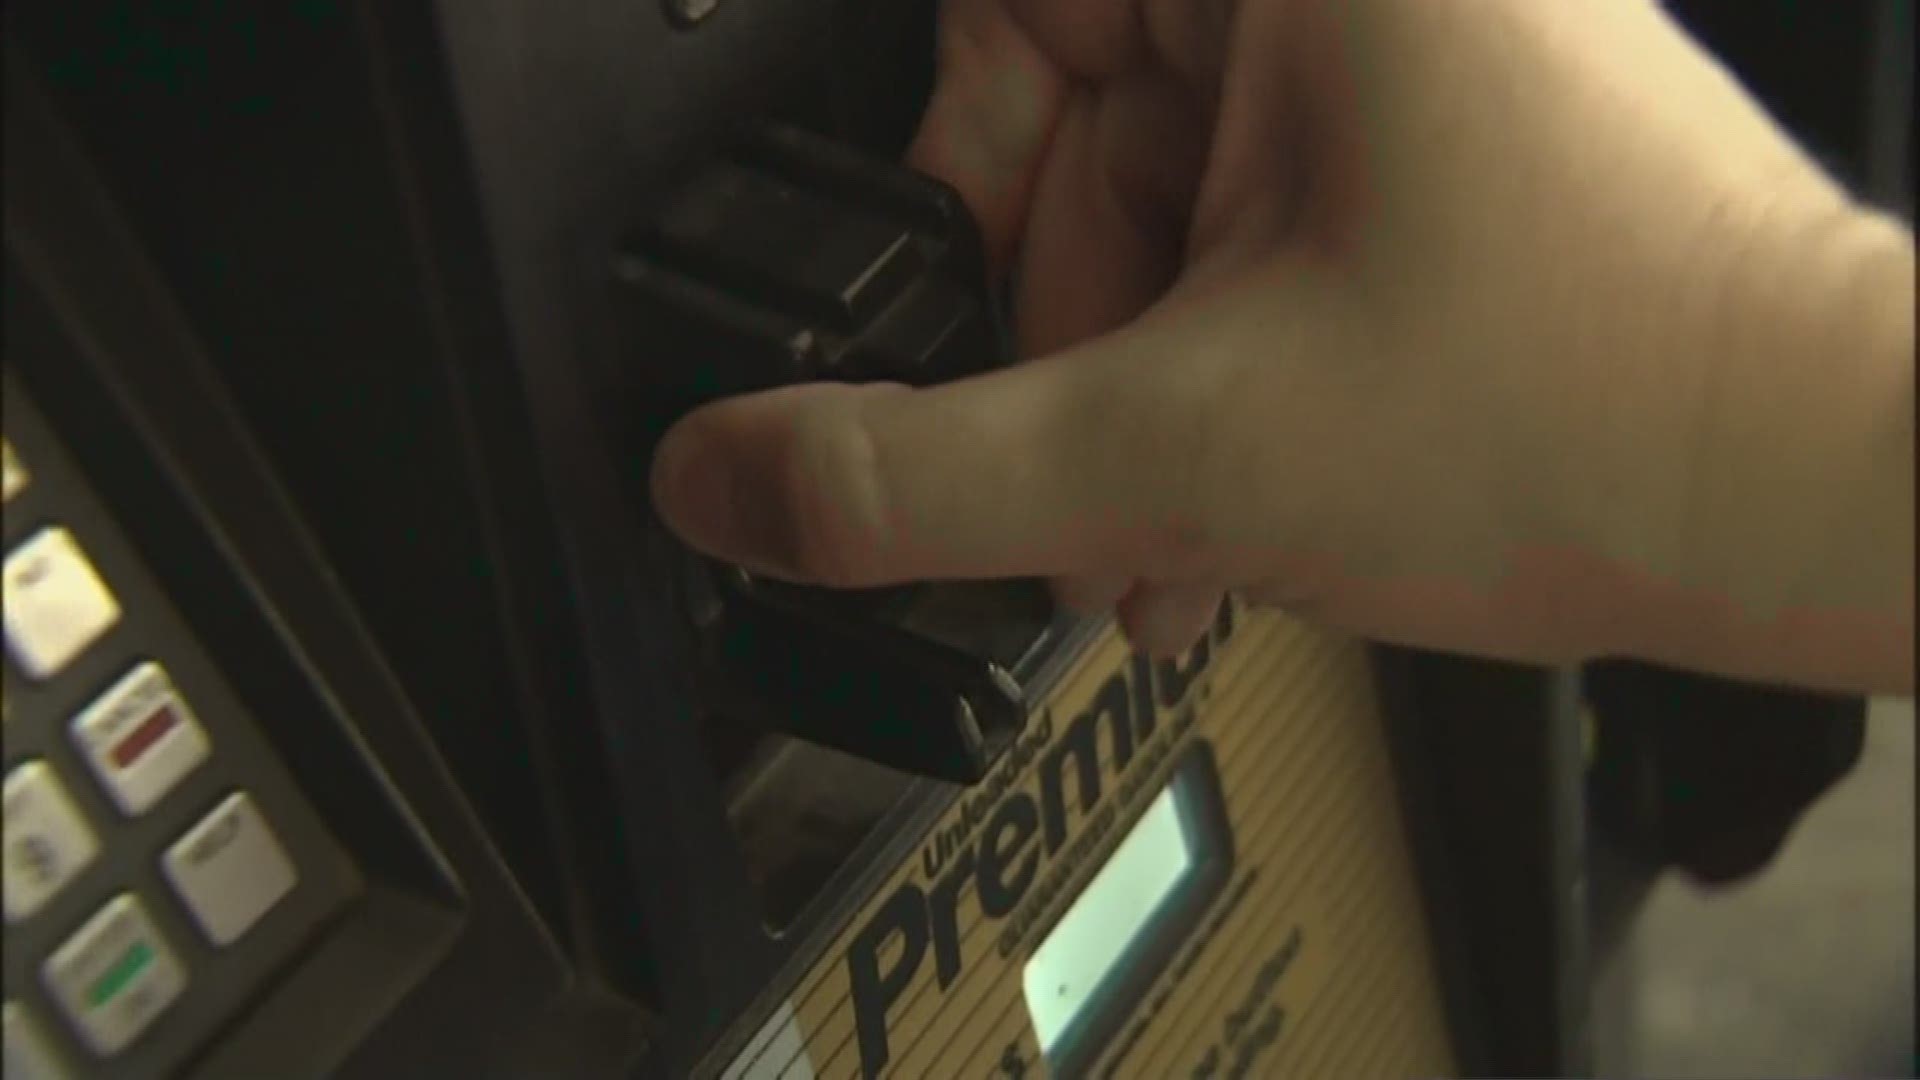 More credit card skimmers were discovered at gas pumps throughout Arizona. Here's how you a can spot a fraudulent skimmer devices.